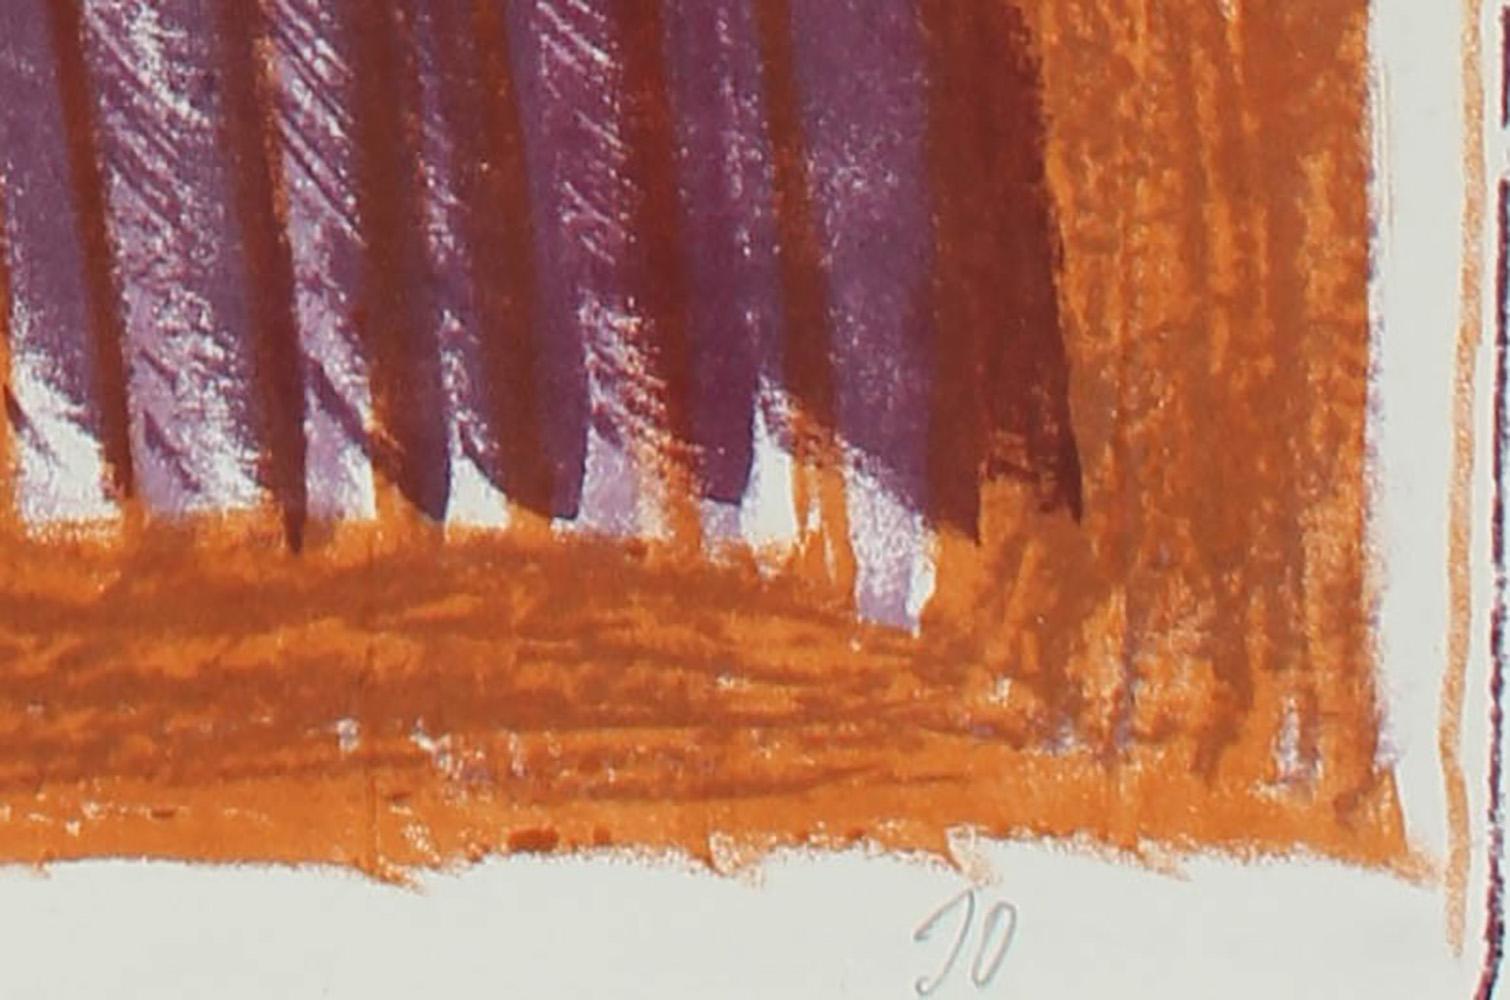 Mid Century Modernist Lithograph in Rust and Purple, Circa 1950s - Print by Jerry Opper